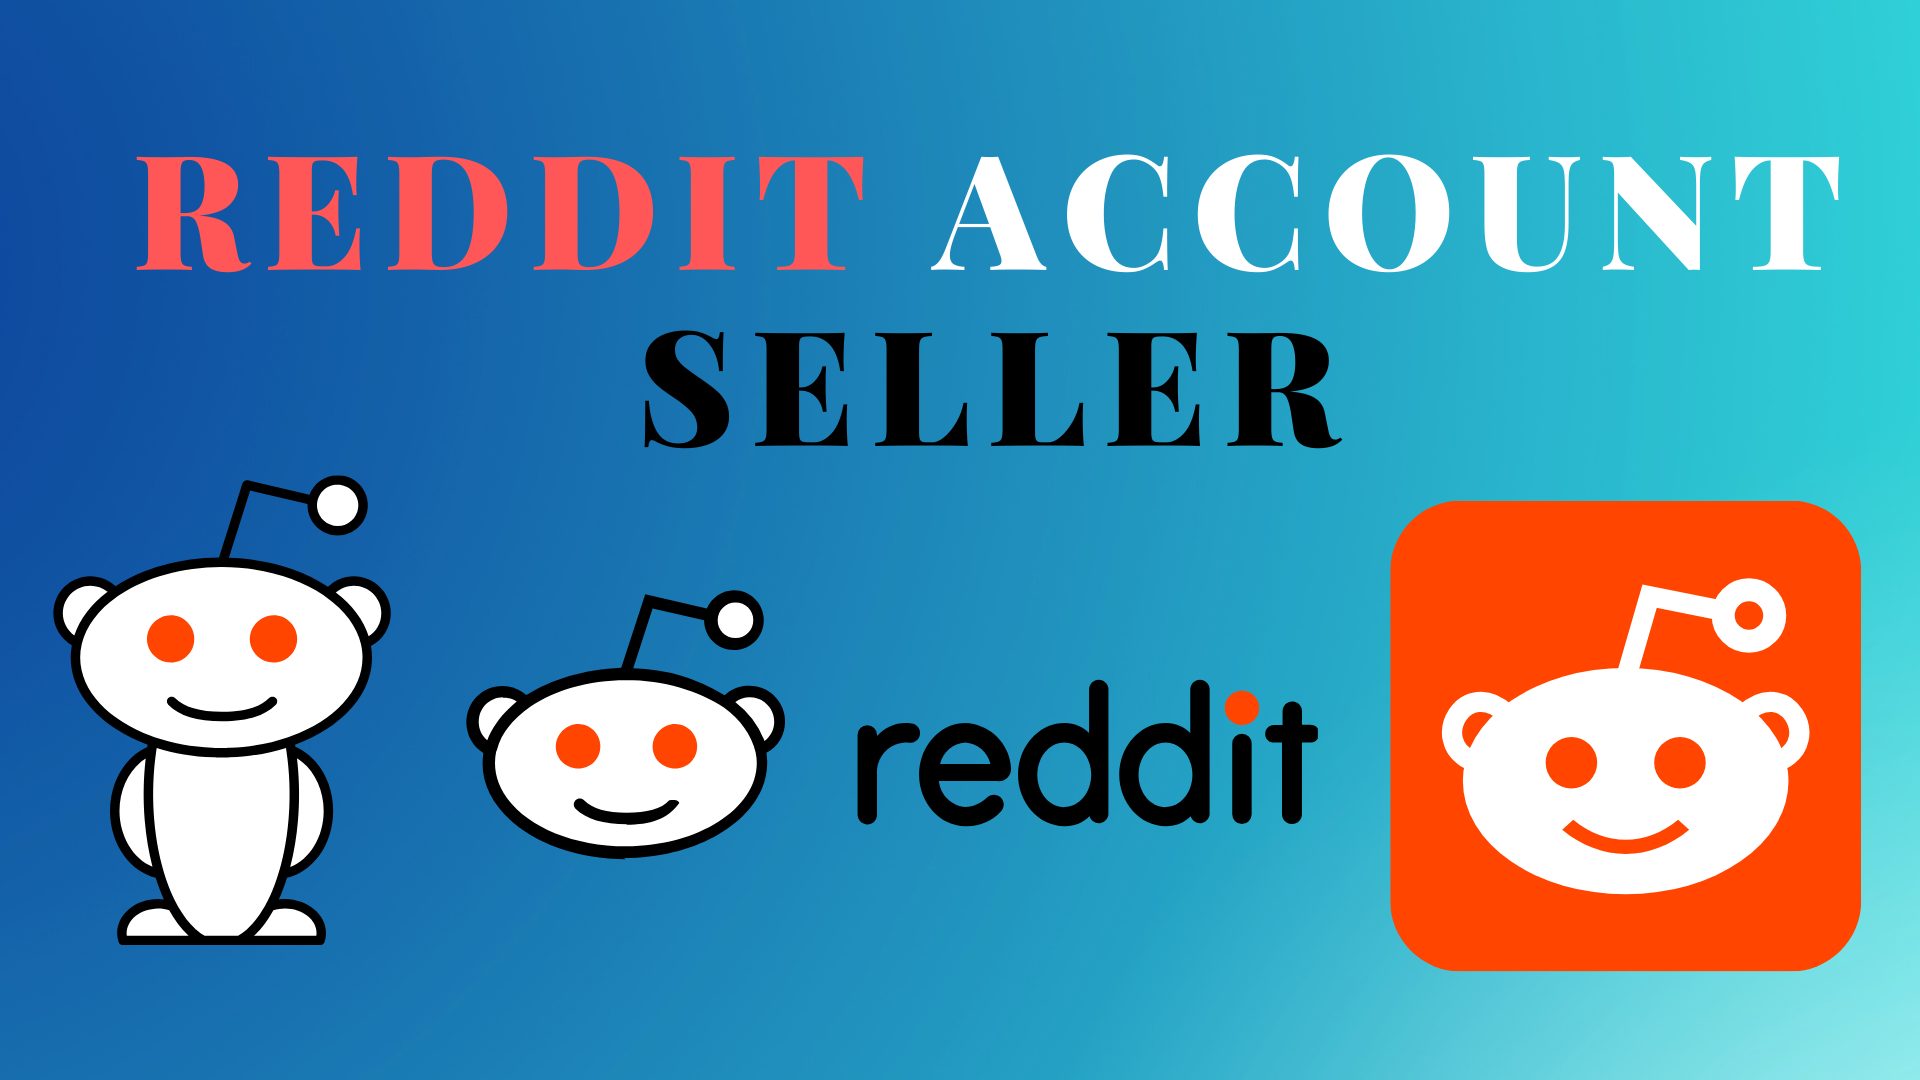 50 New Reddit Account USA Based or World Wide